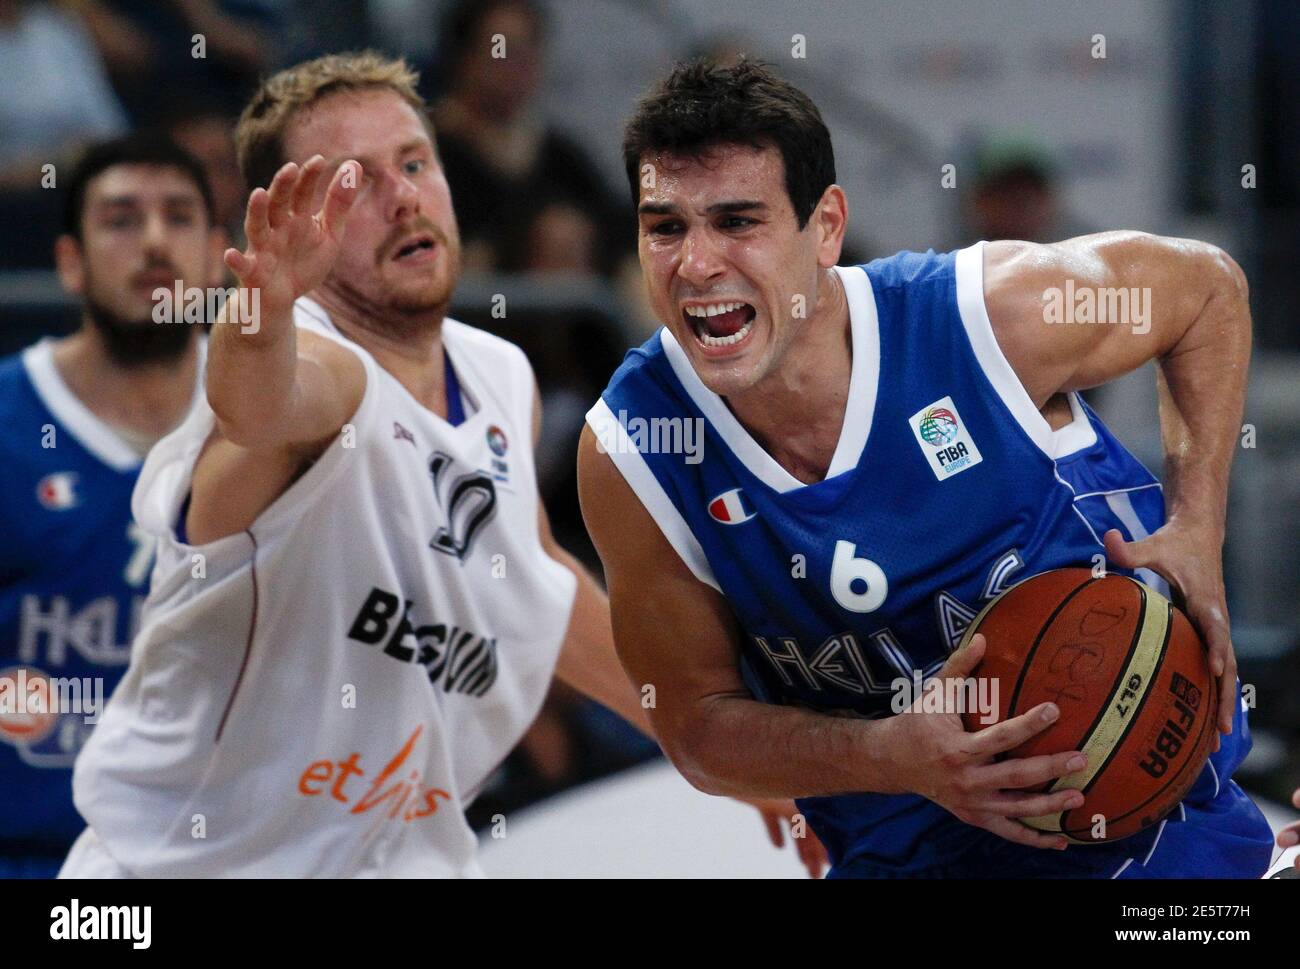 Nikos Zisis (R) of Greece drives past Dimitri Lauwers of Belgium during  their men's basketball BEKO Supercup game in Bamberg August 21, 2011.  REUTERS/Alex Domanski (GERMANY - Tags: SPORT BASKETBALL Stock Photo - Alamy